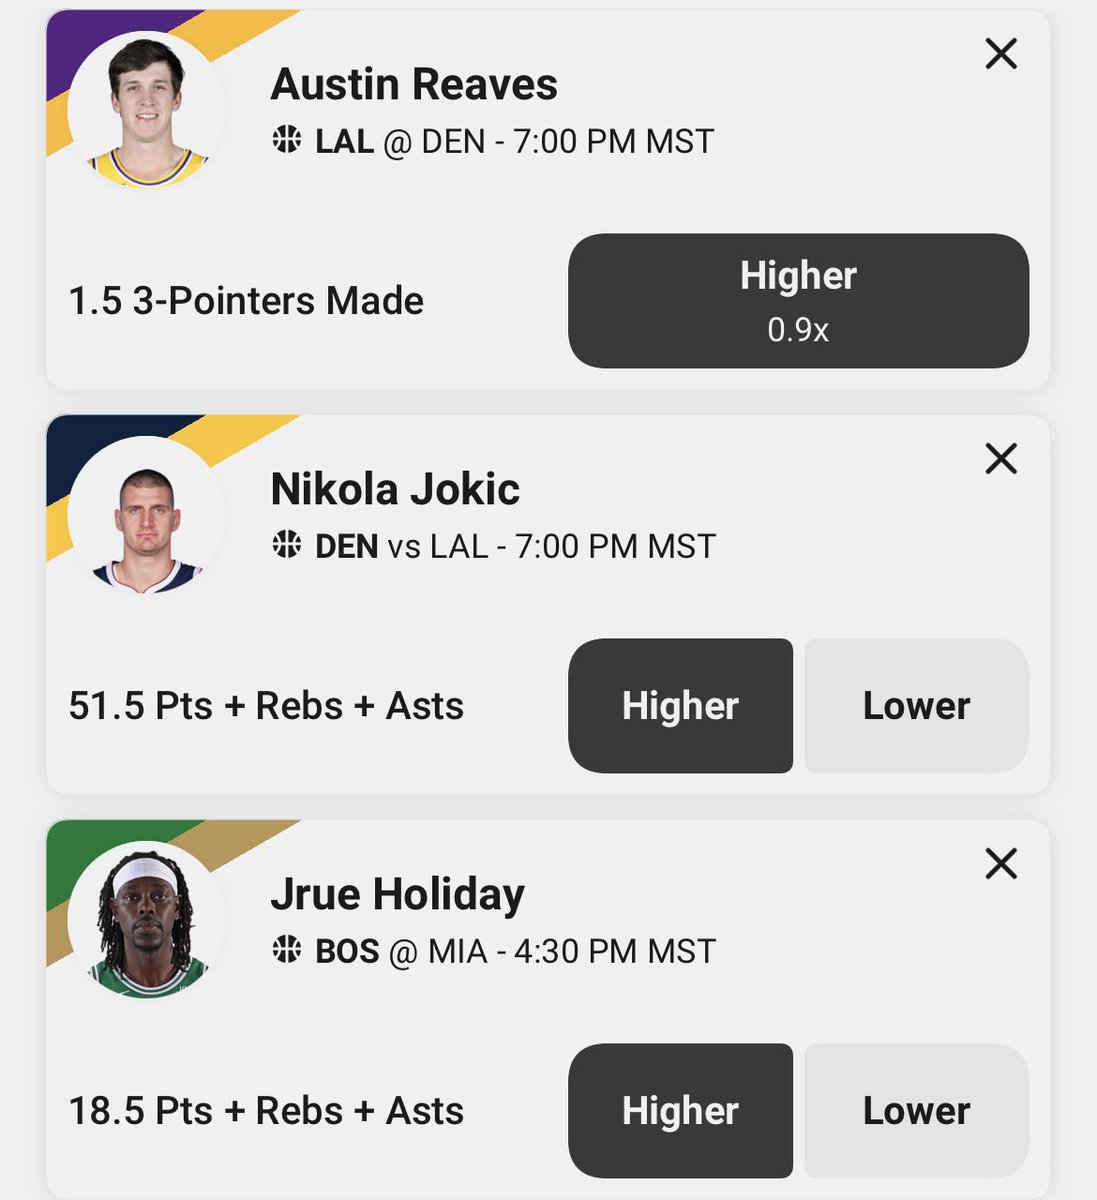 Here are my picks for NBA today! 🔥 @UnderdogFantasy’s is my favorite part of the app! What do y’all think of these picks?! We hitting today?! 👀👀👀 Click this link play.underdogfantasy.com/p-brawadis & use code “brawadis” for a $100 deposit match from underdog! 🤑